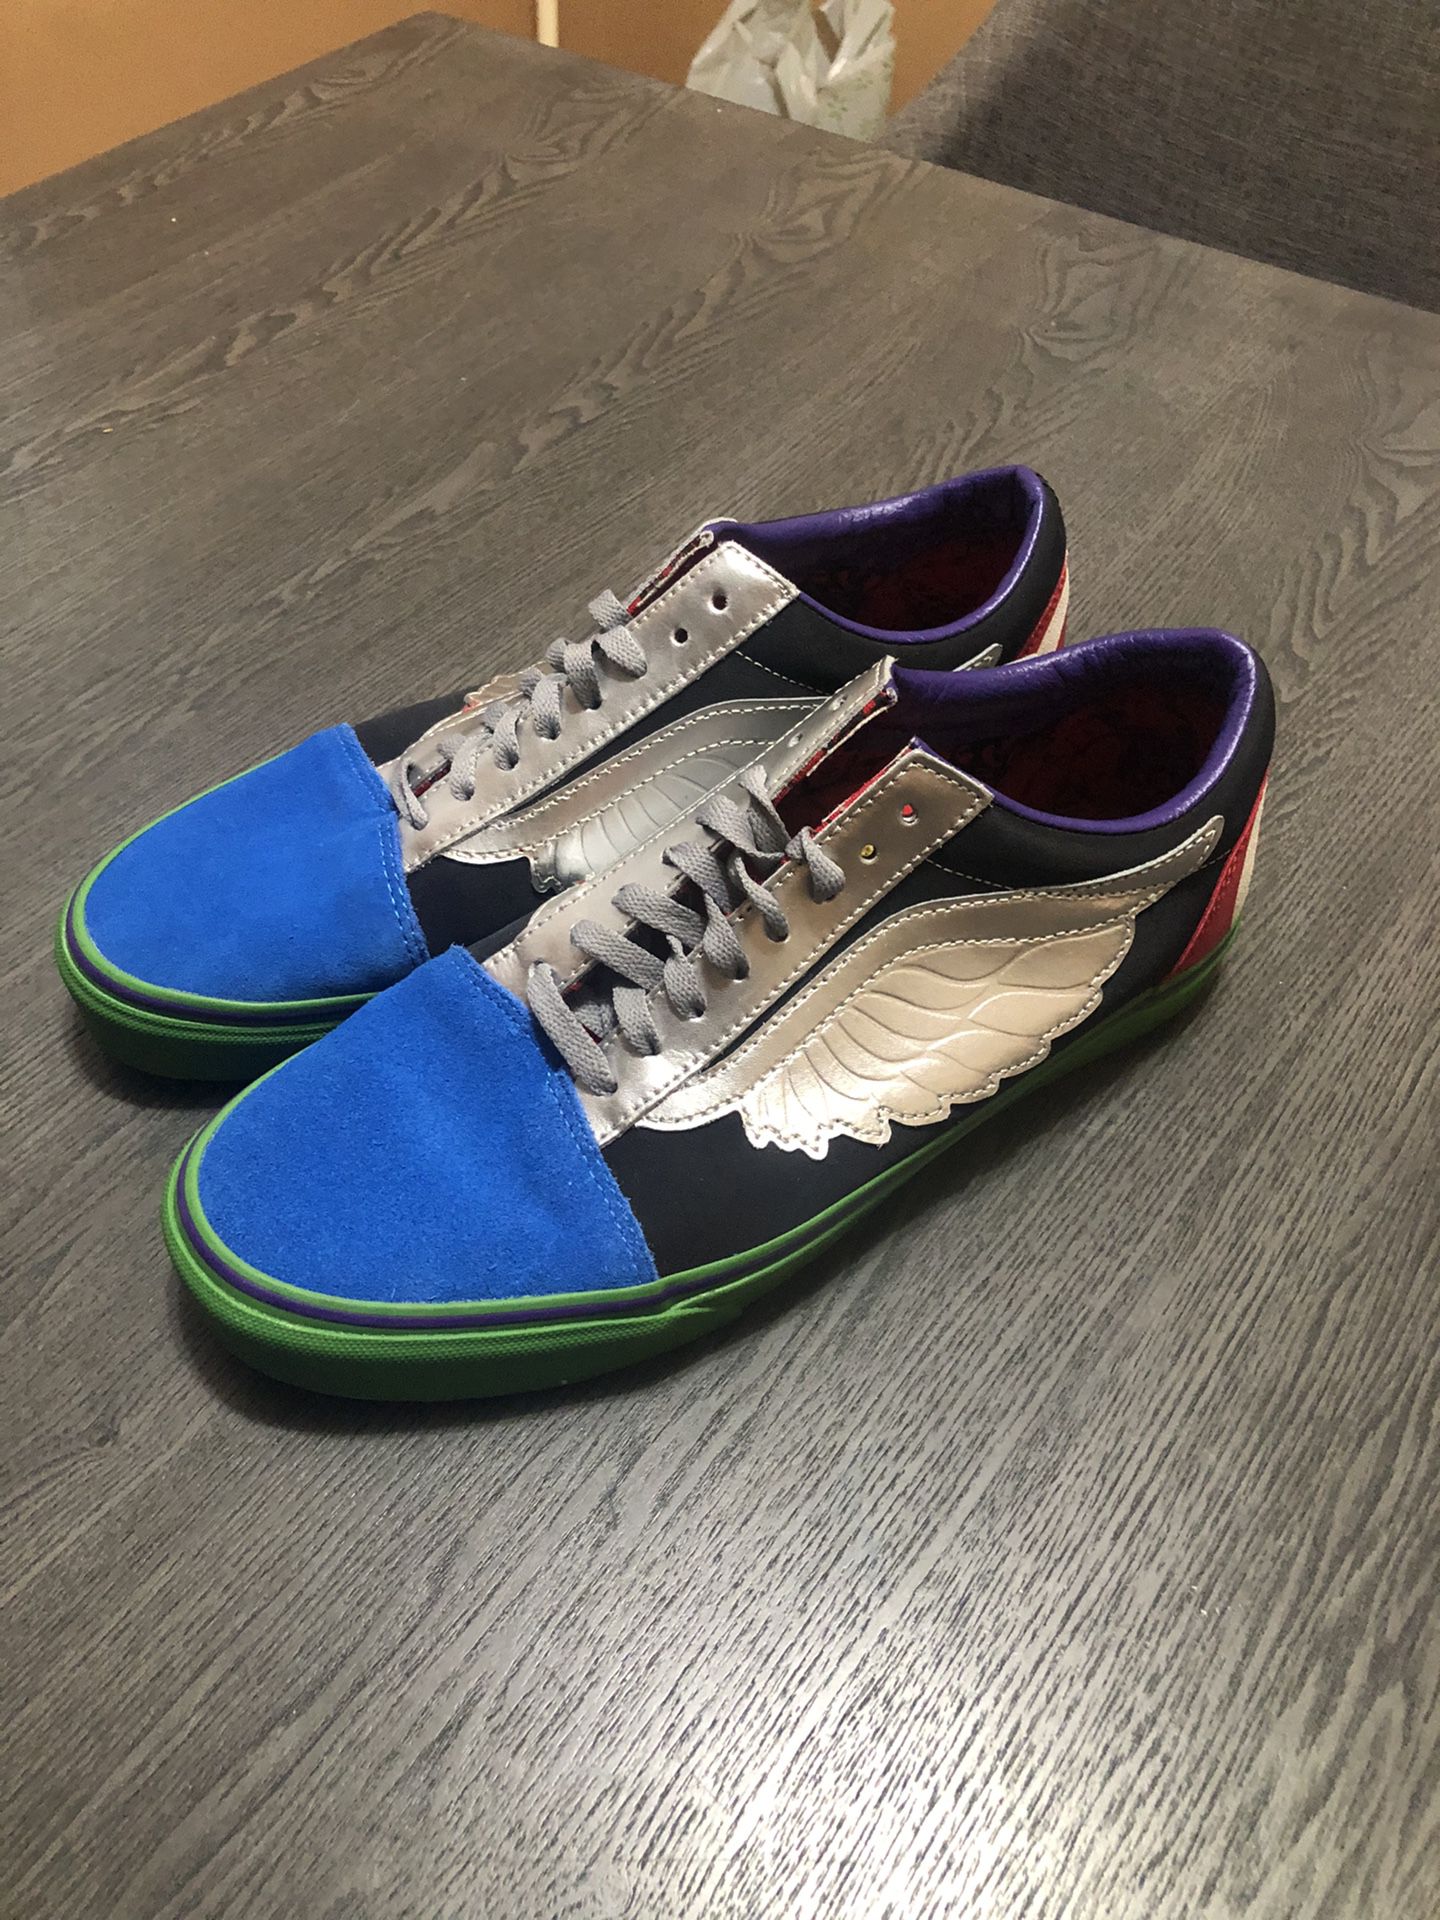 Vans What The Marvel size 10.5